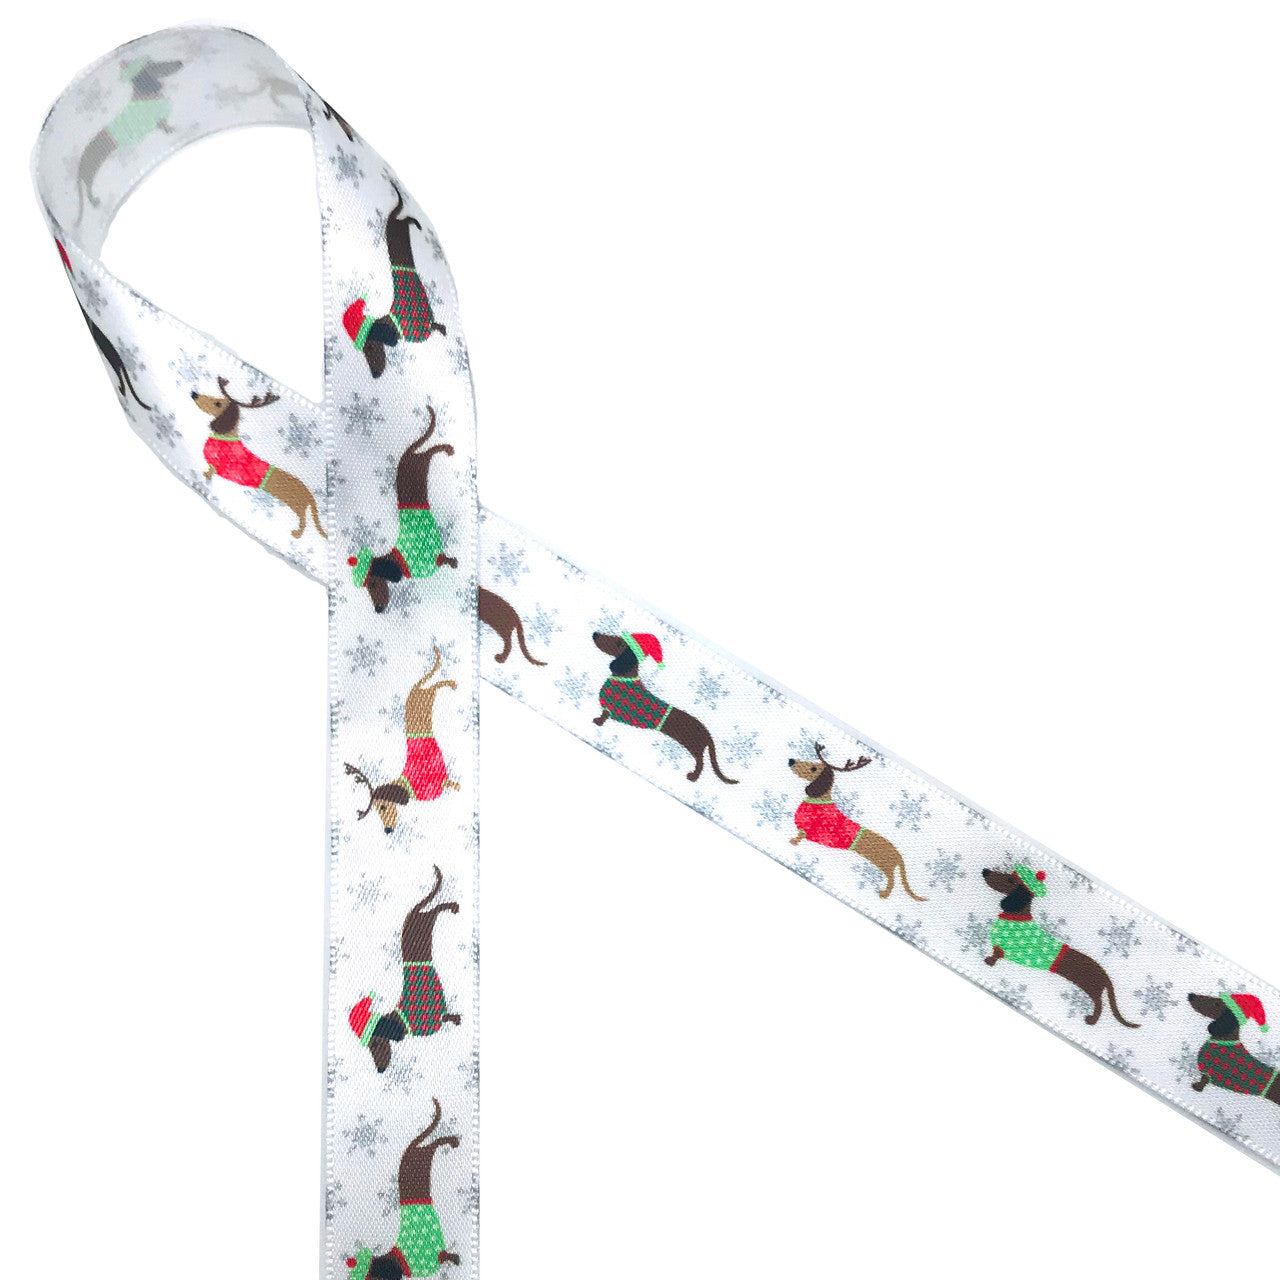 Dachshunds in the snow line up on a 5/8" white satin ribbon wearing their colorful Winter sweaters and hats of green and red.  Make this special ribbon part of your pet's Holiday celebration